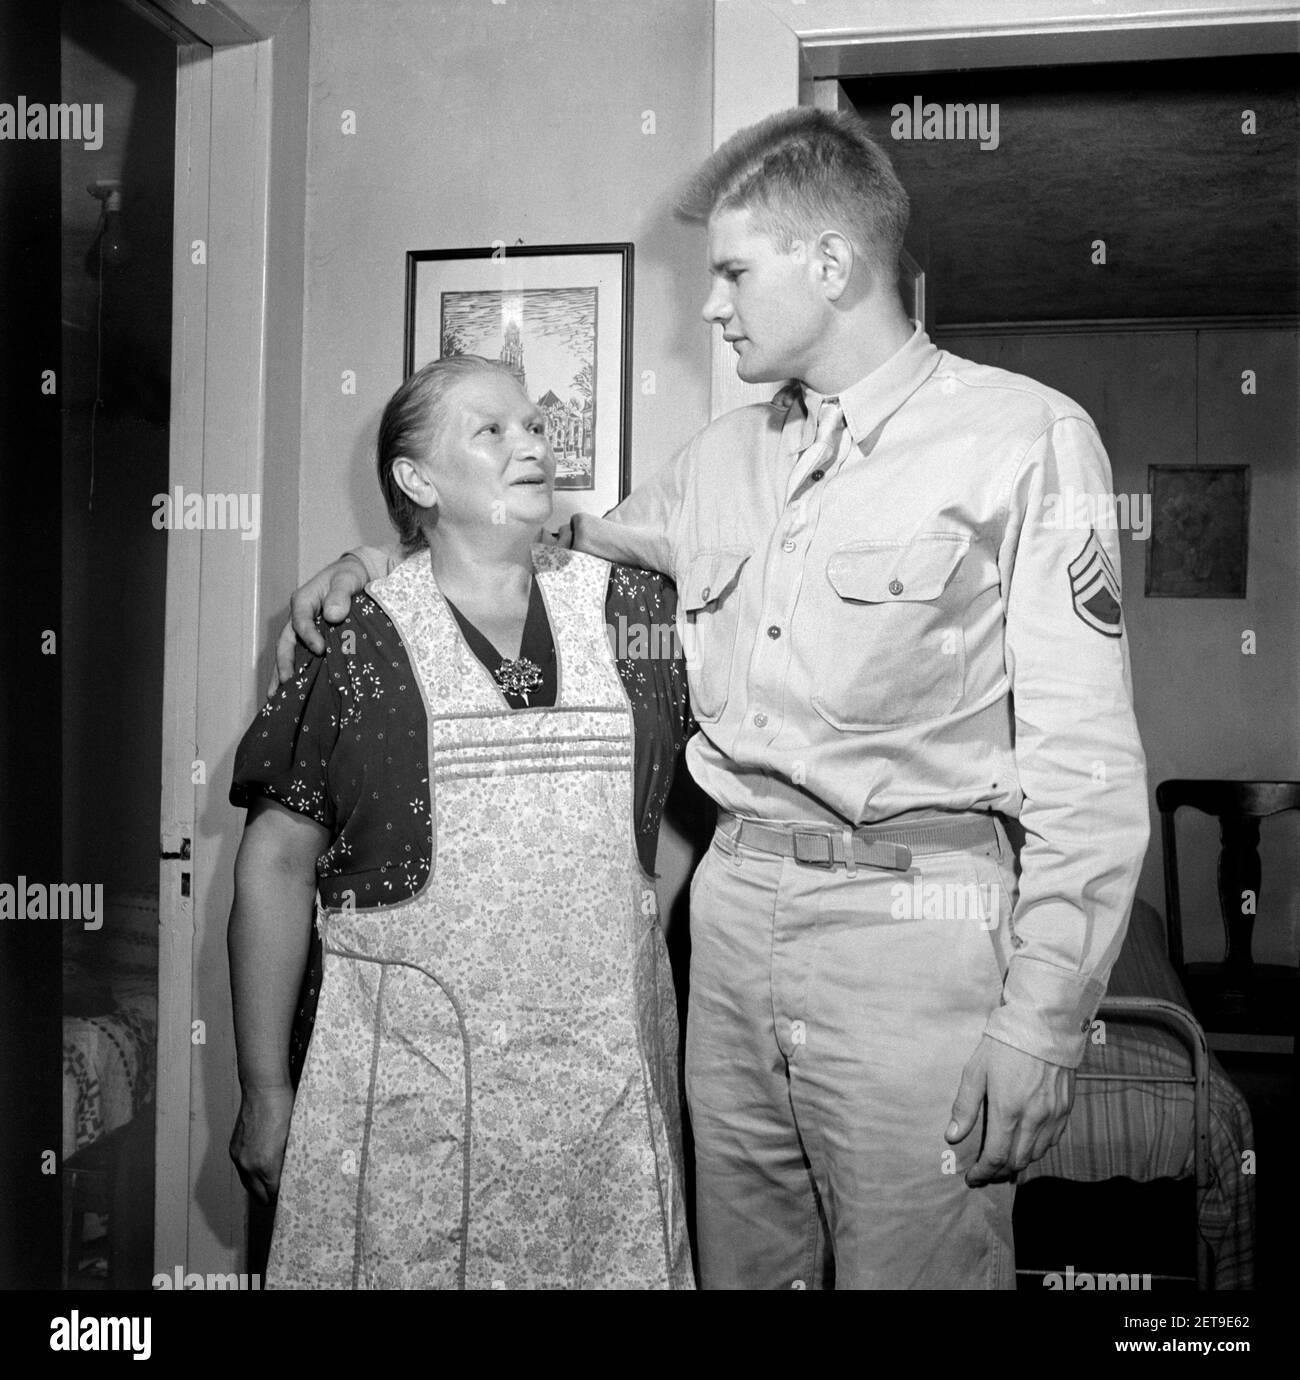 Sergeant George Camblair and his mother while at Home on Weekend Furlough, Washington, D.C., USA, Jack Delano, U.S. Office of War Information, September 1942 Stock Photo